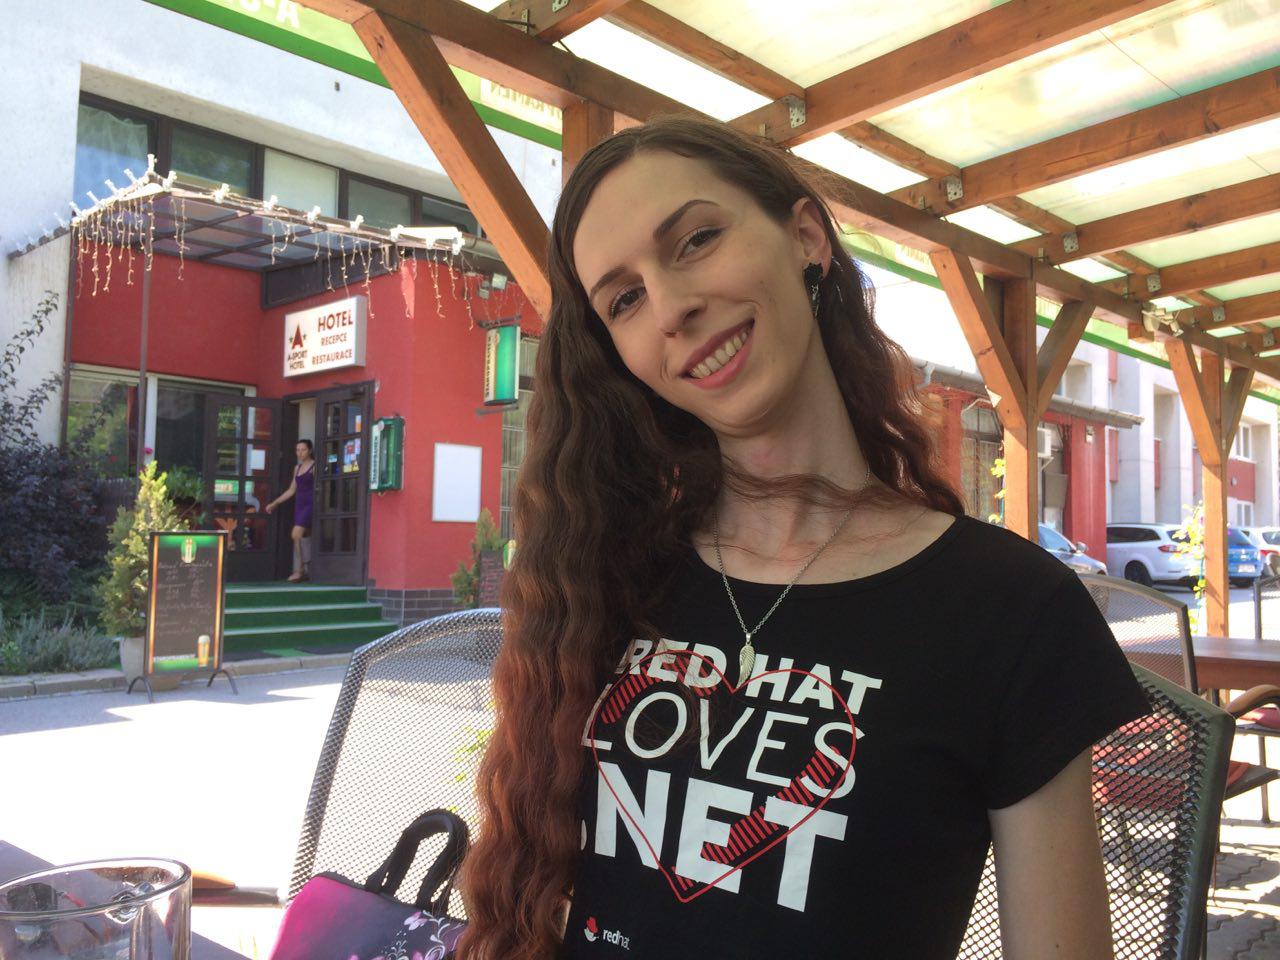 Radka in her new Red Hat loves .NET T-Shirt.